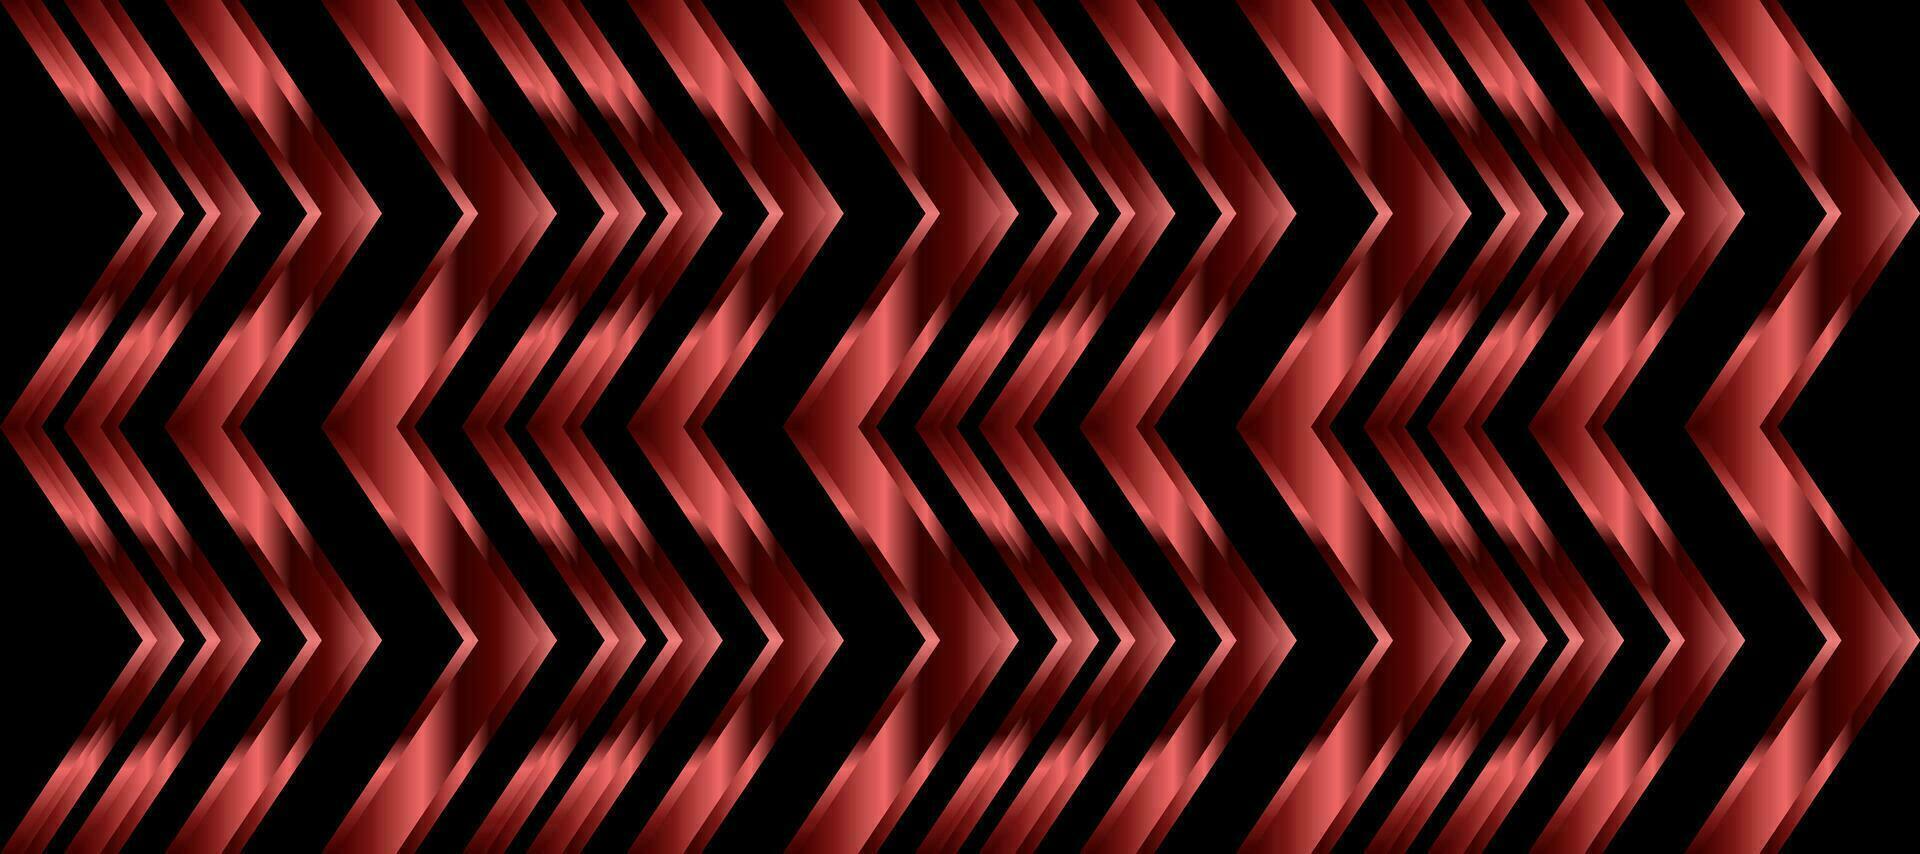 Abstract Shining Red Copper Zigzag Black background Wallpaper vector